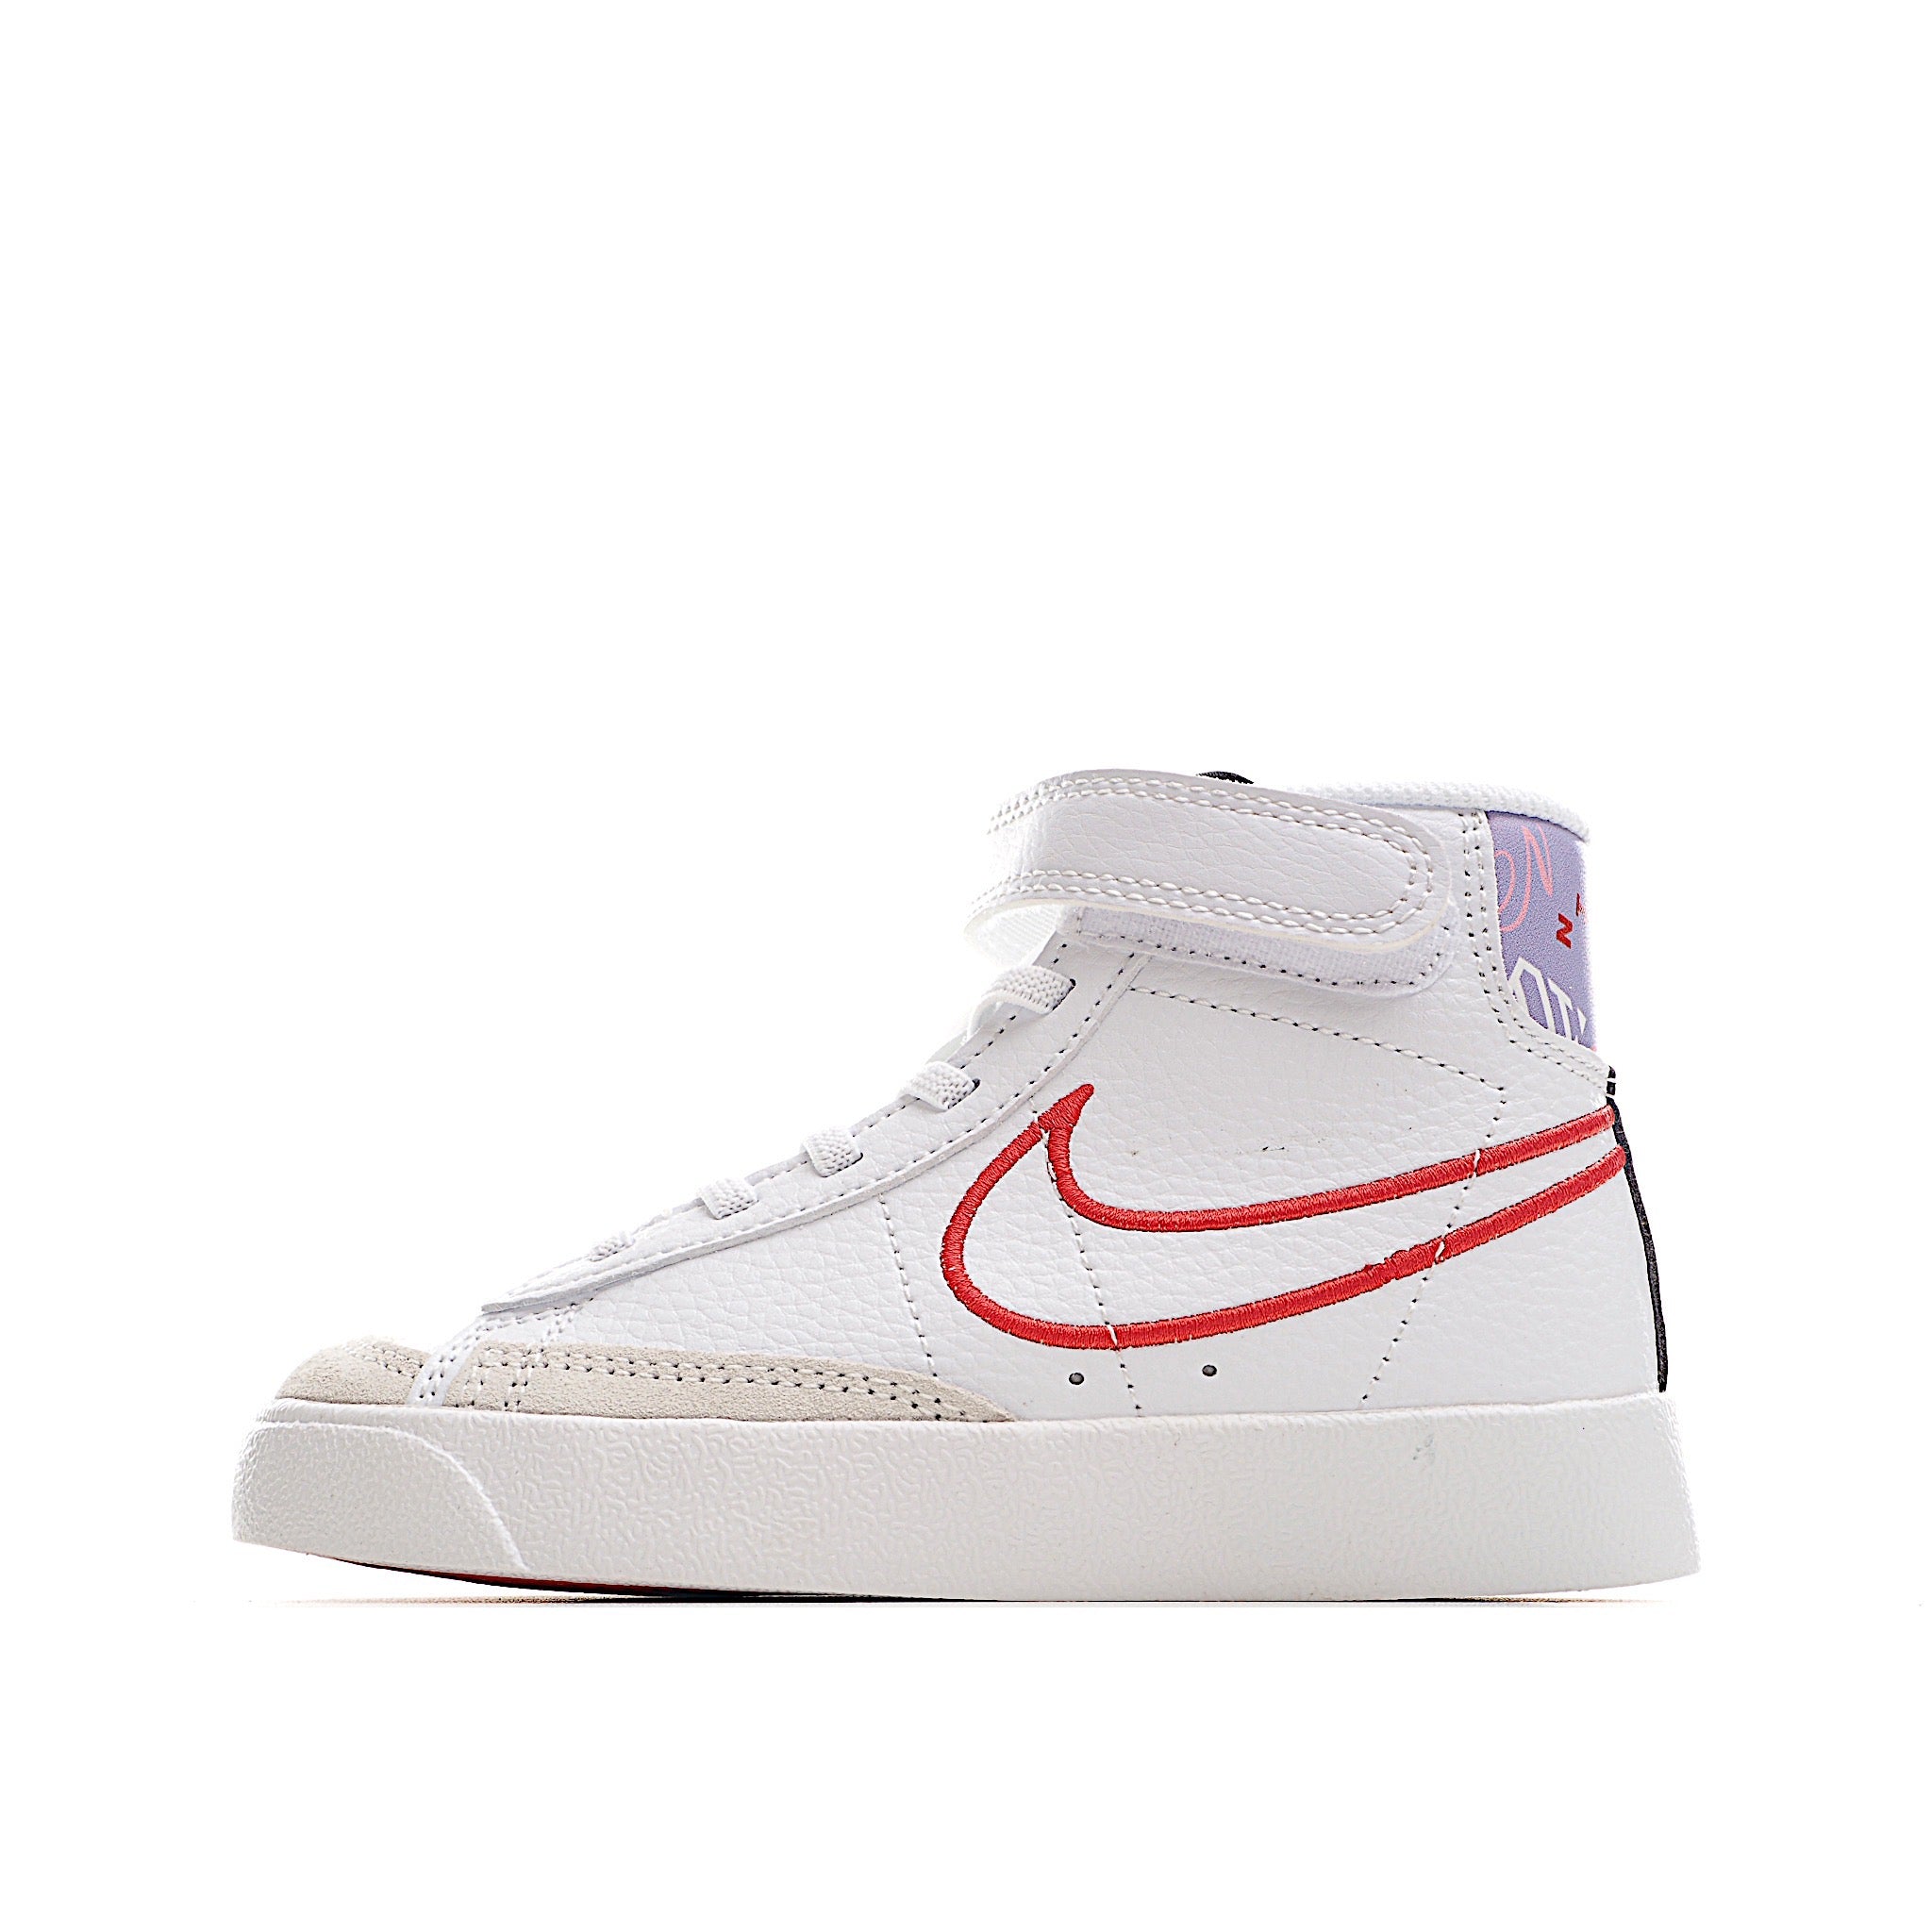 Nike high blazer purple and red shoes